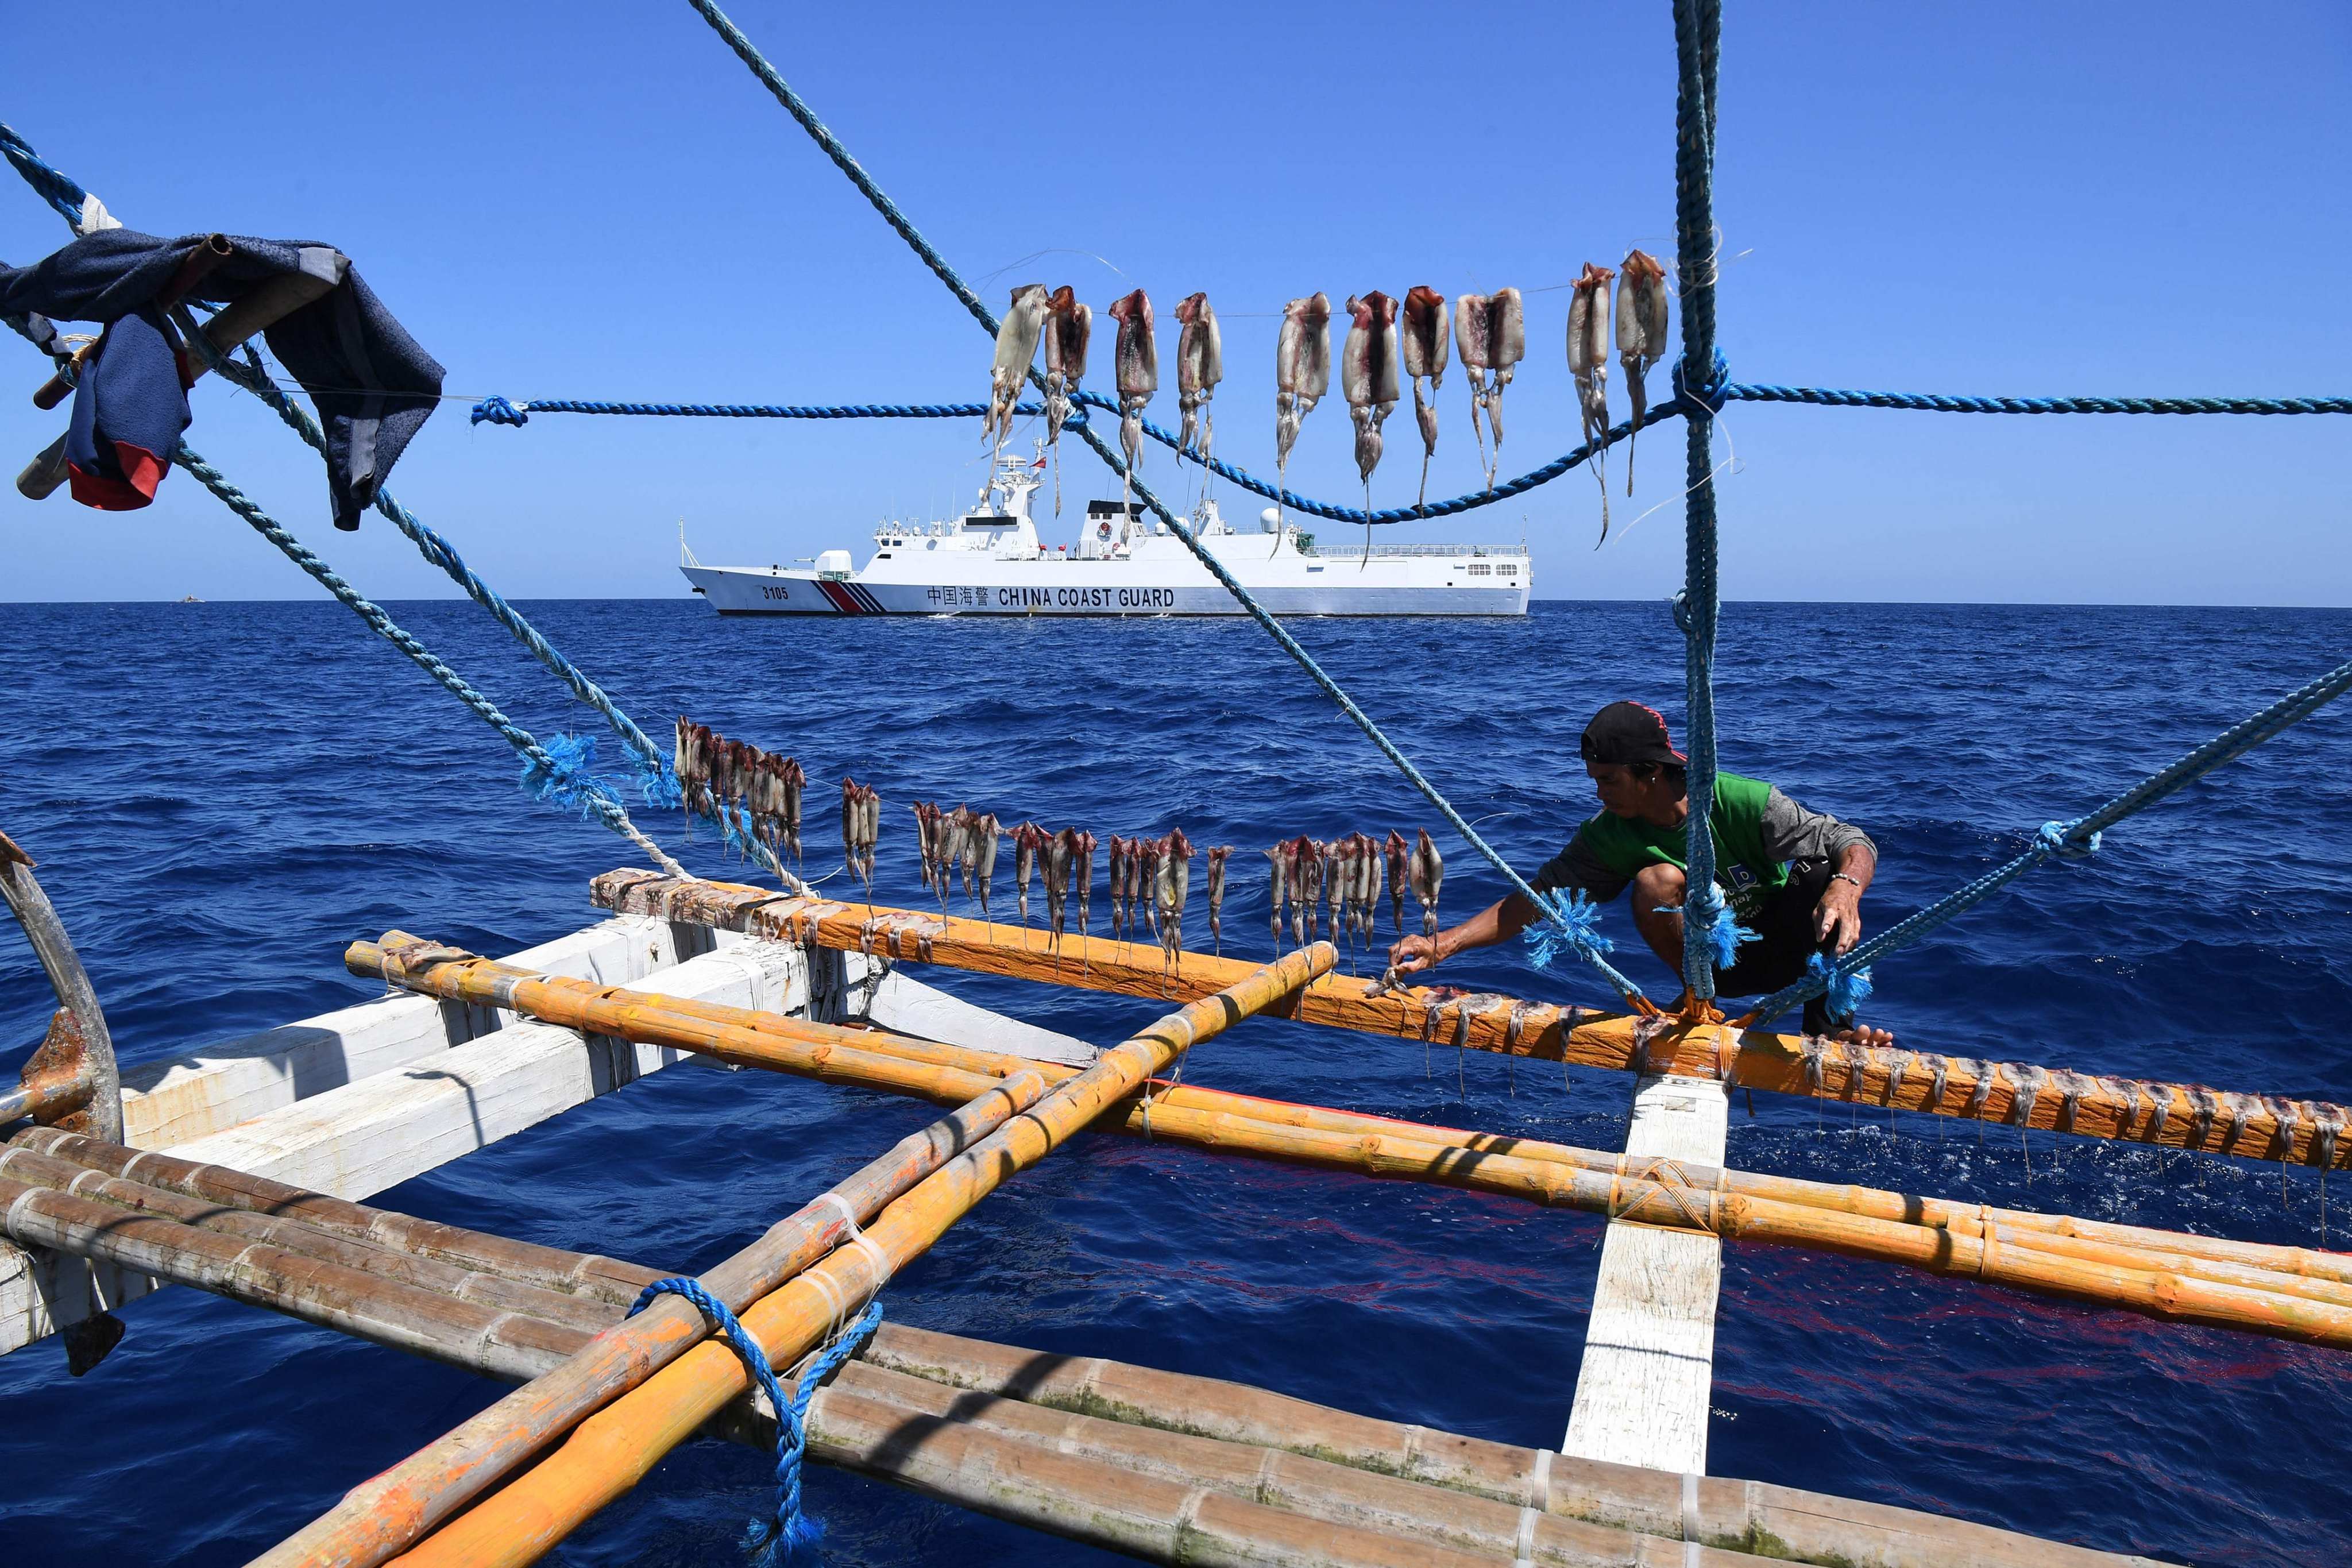 A Filipino fisherman drying squid on his fishing boat while a Chinese coast guard ship monitors near the China-controlled Scarborough Shoal, in disputed waters of the South China Sea, on February 15. Photo: AFP